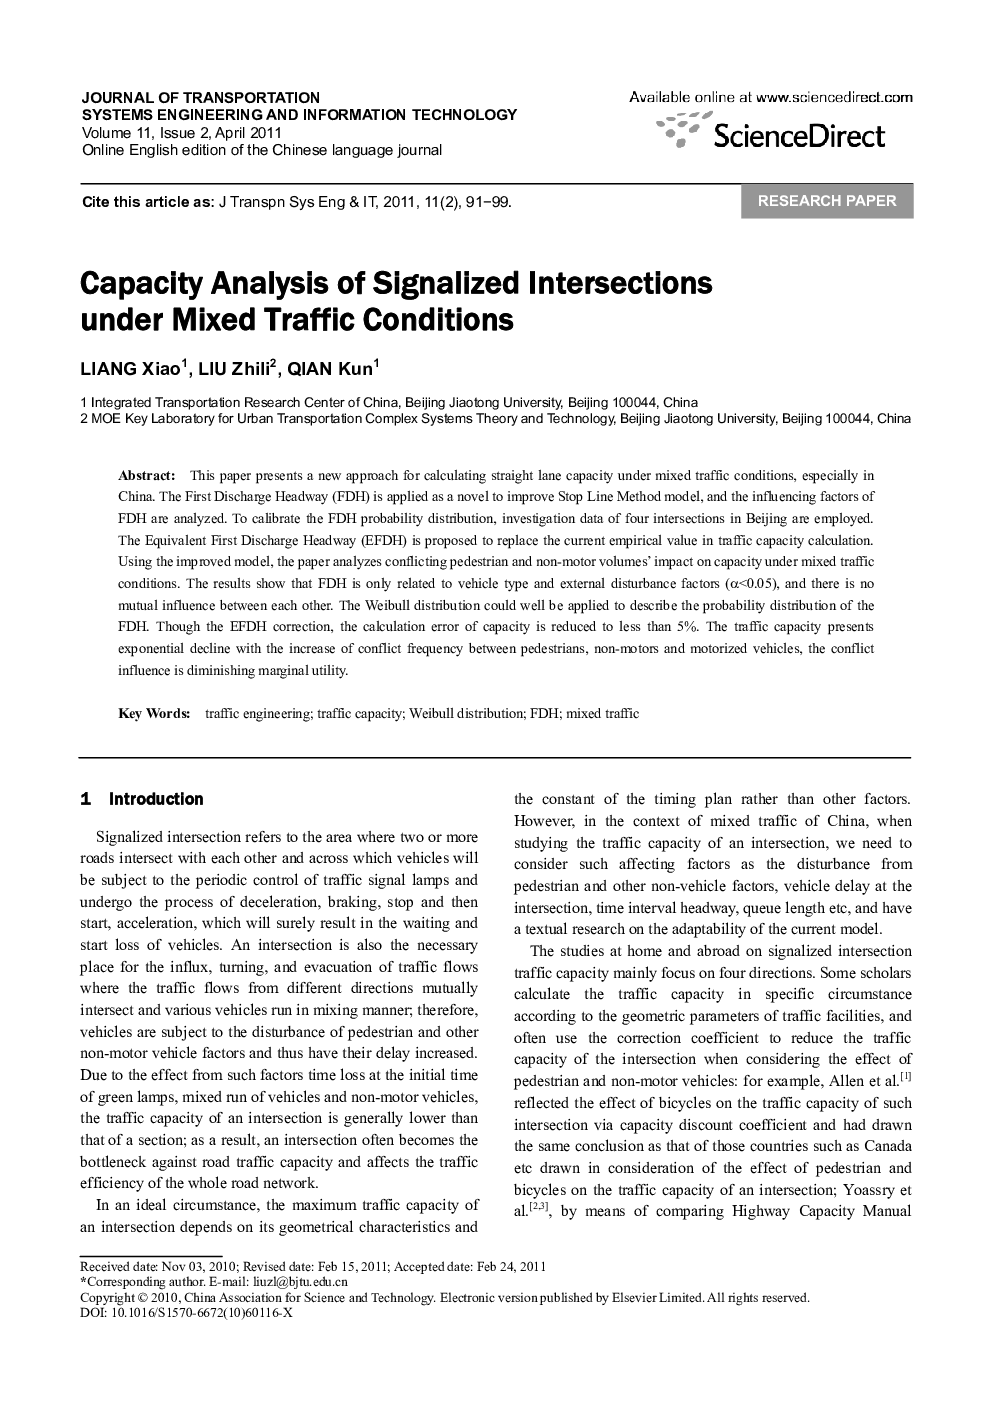 Capacity Analysis of Signalized Intersections under Mixed Traffic Conditions